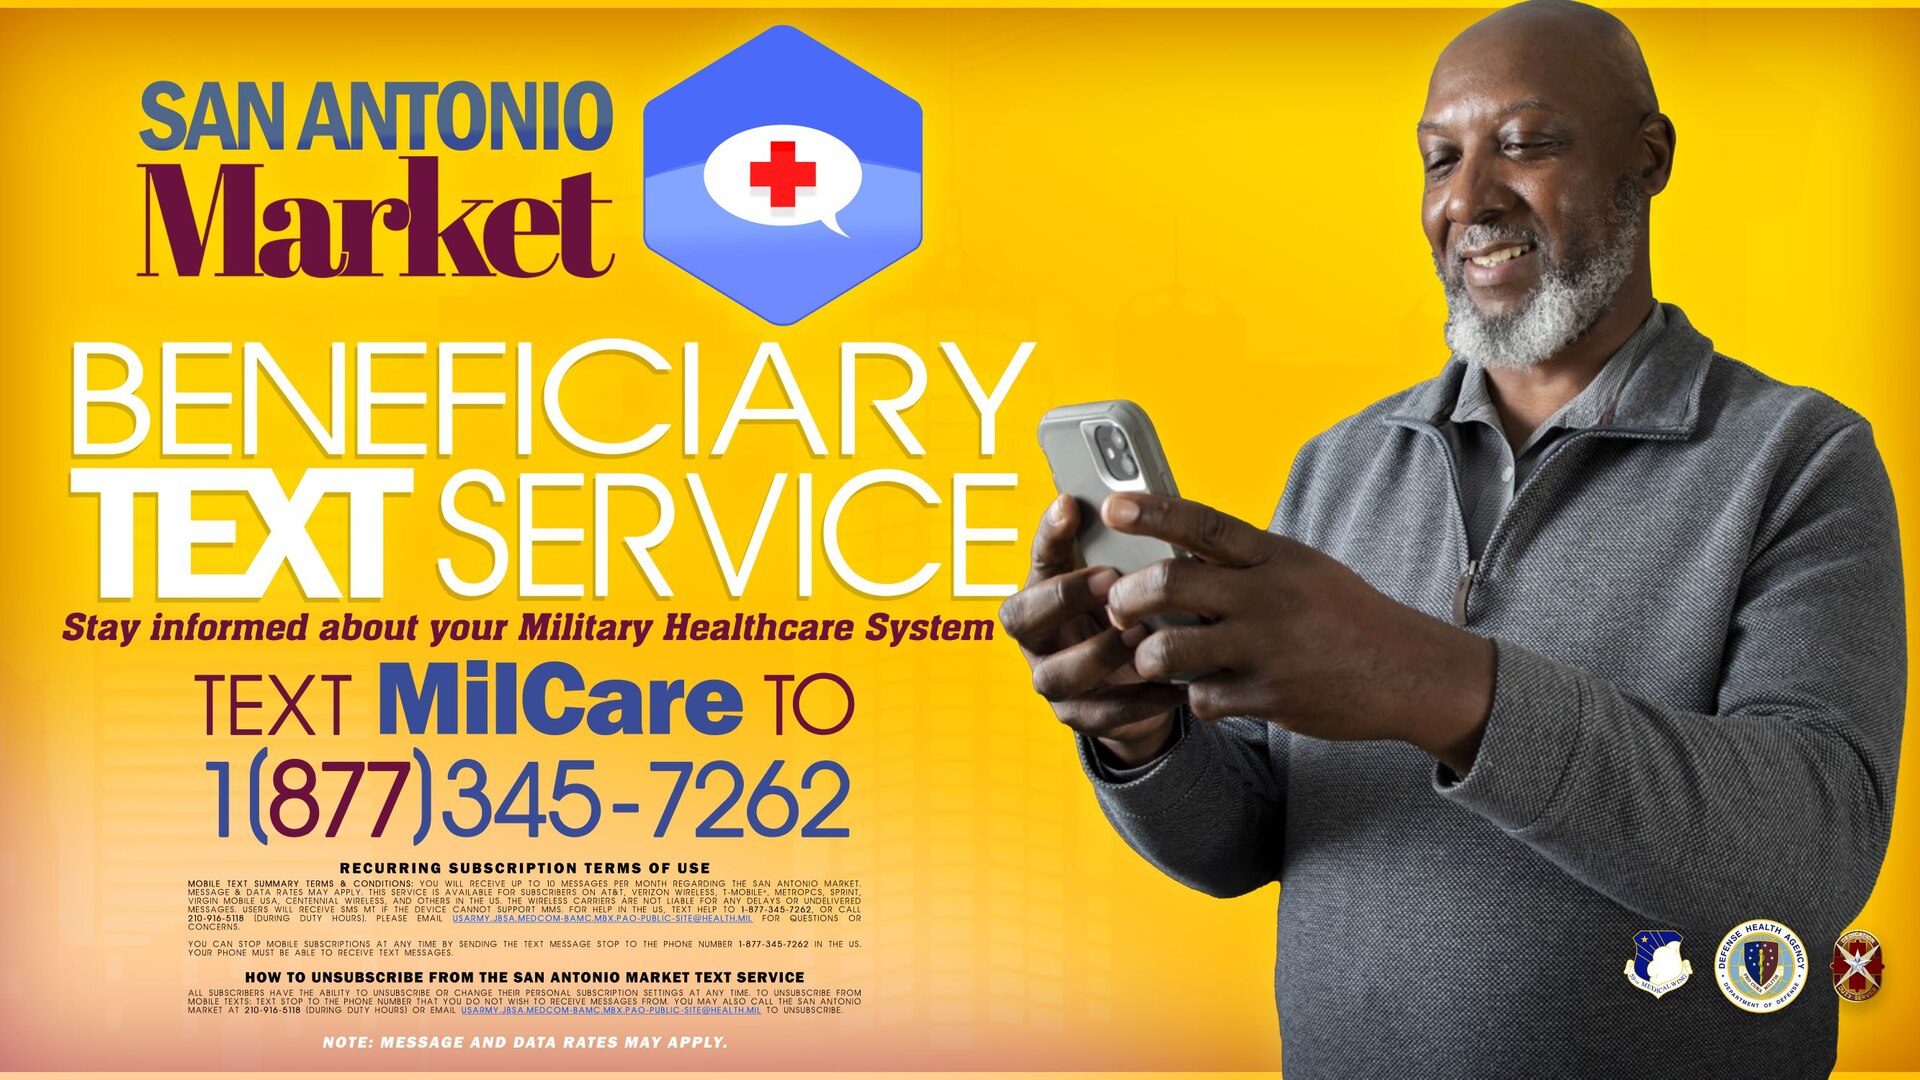 The San Antonio Market has launched a text messaging service to keep TRICARE beneficiaries informed about their local military healthcare system.